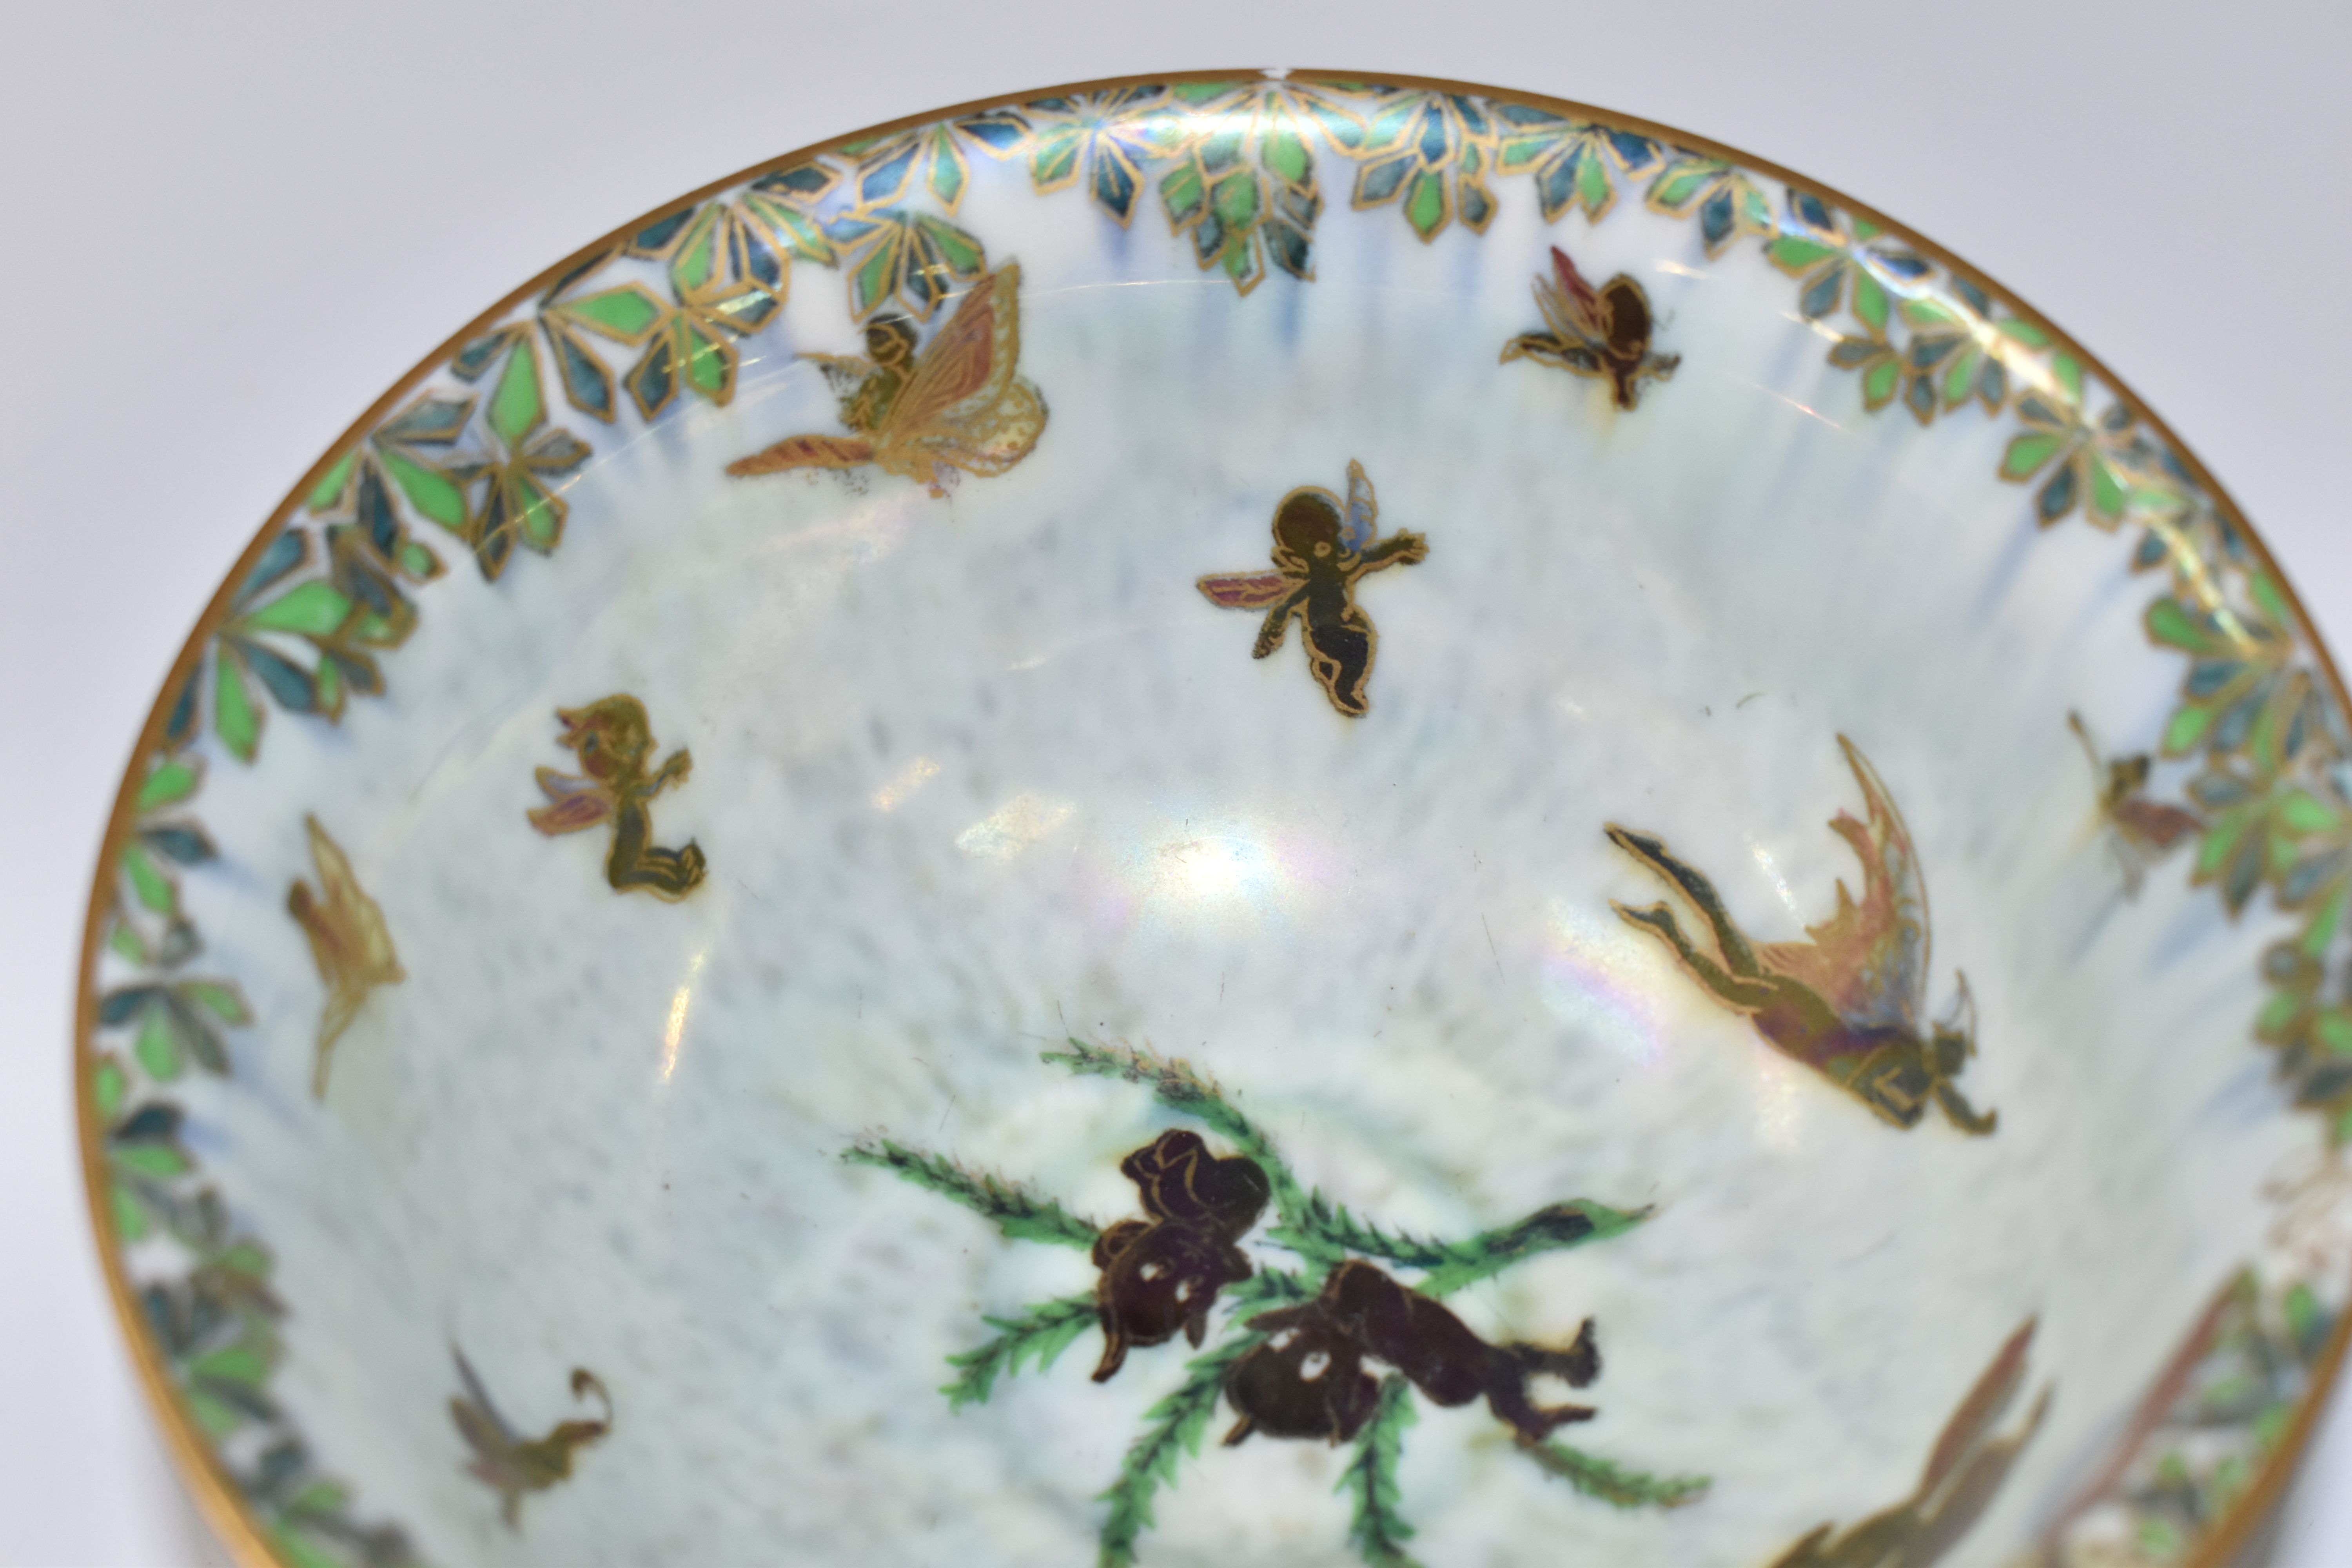 A WEDGWOOD FAIRYLAND LUSTRE FOOTED BOWL, decorated with a mother of pearl lustre with fairies in - Image 6 of 9